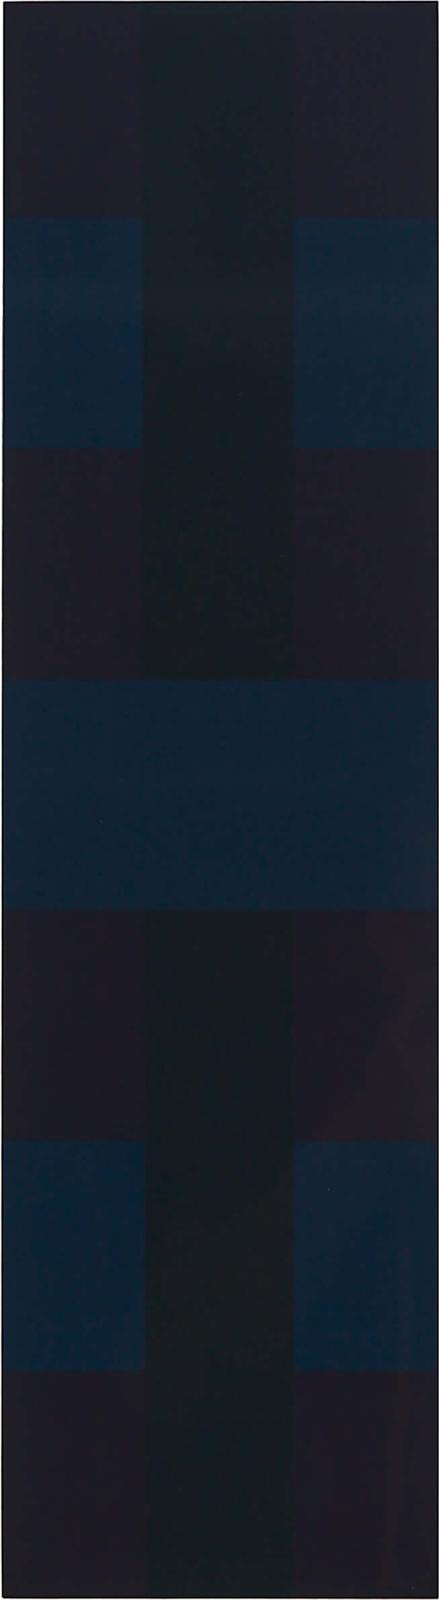 Ad Reinhardt (1913-1967) - Four Plates, Nos. 1,2,7 And 8  (From  10  Screenprints By Ad Reinhardt), 1966